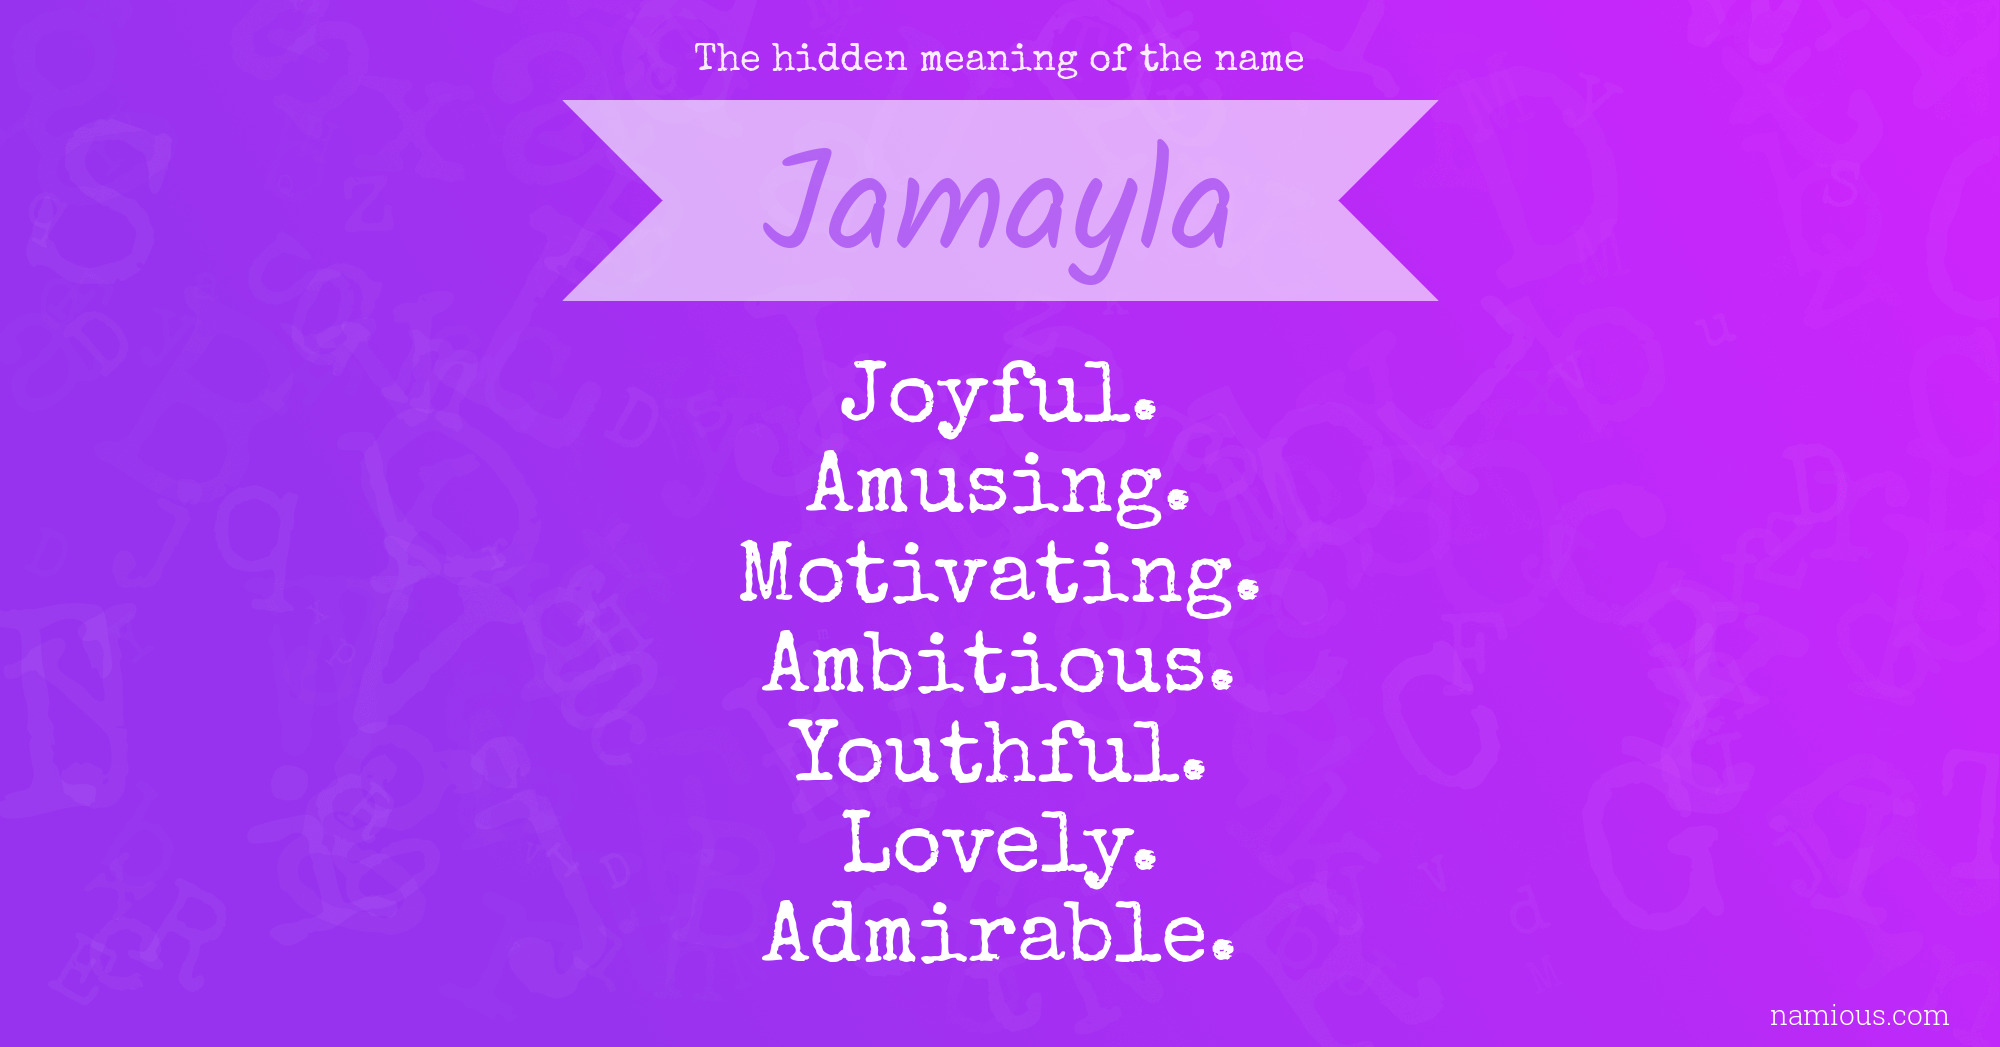 The hidden meaning of the name Jamayla